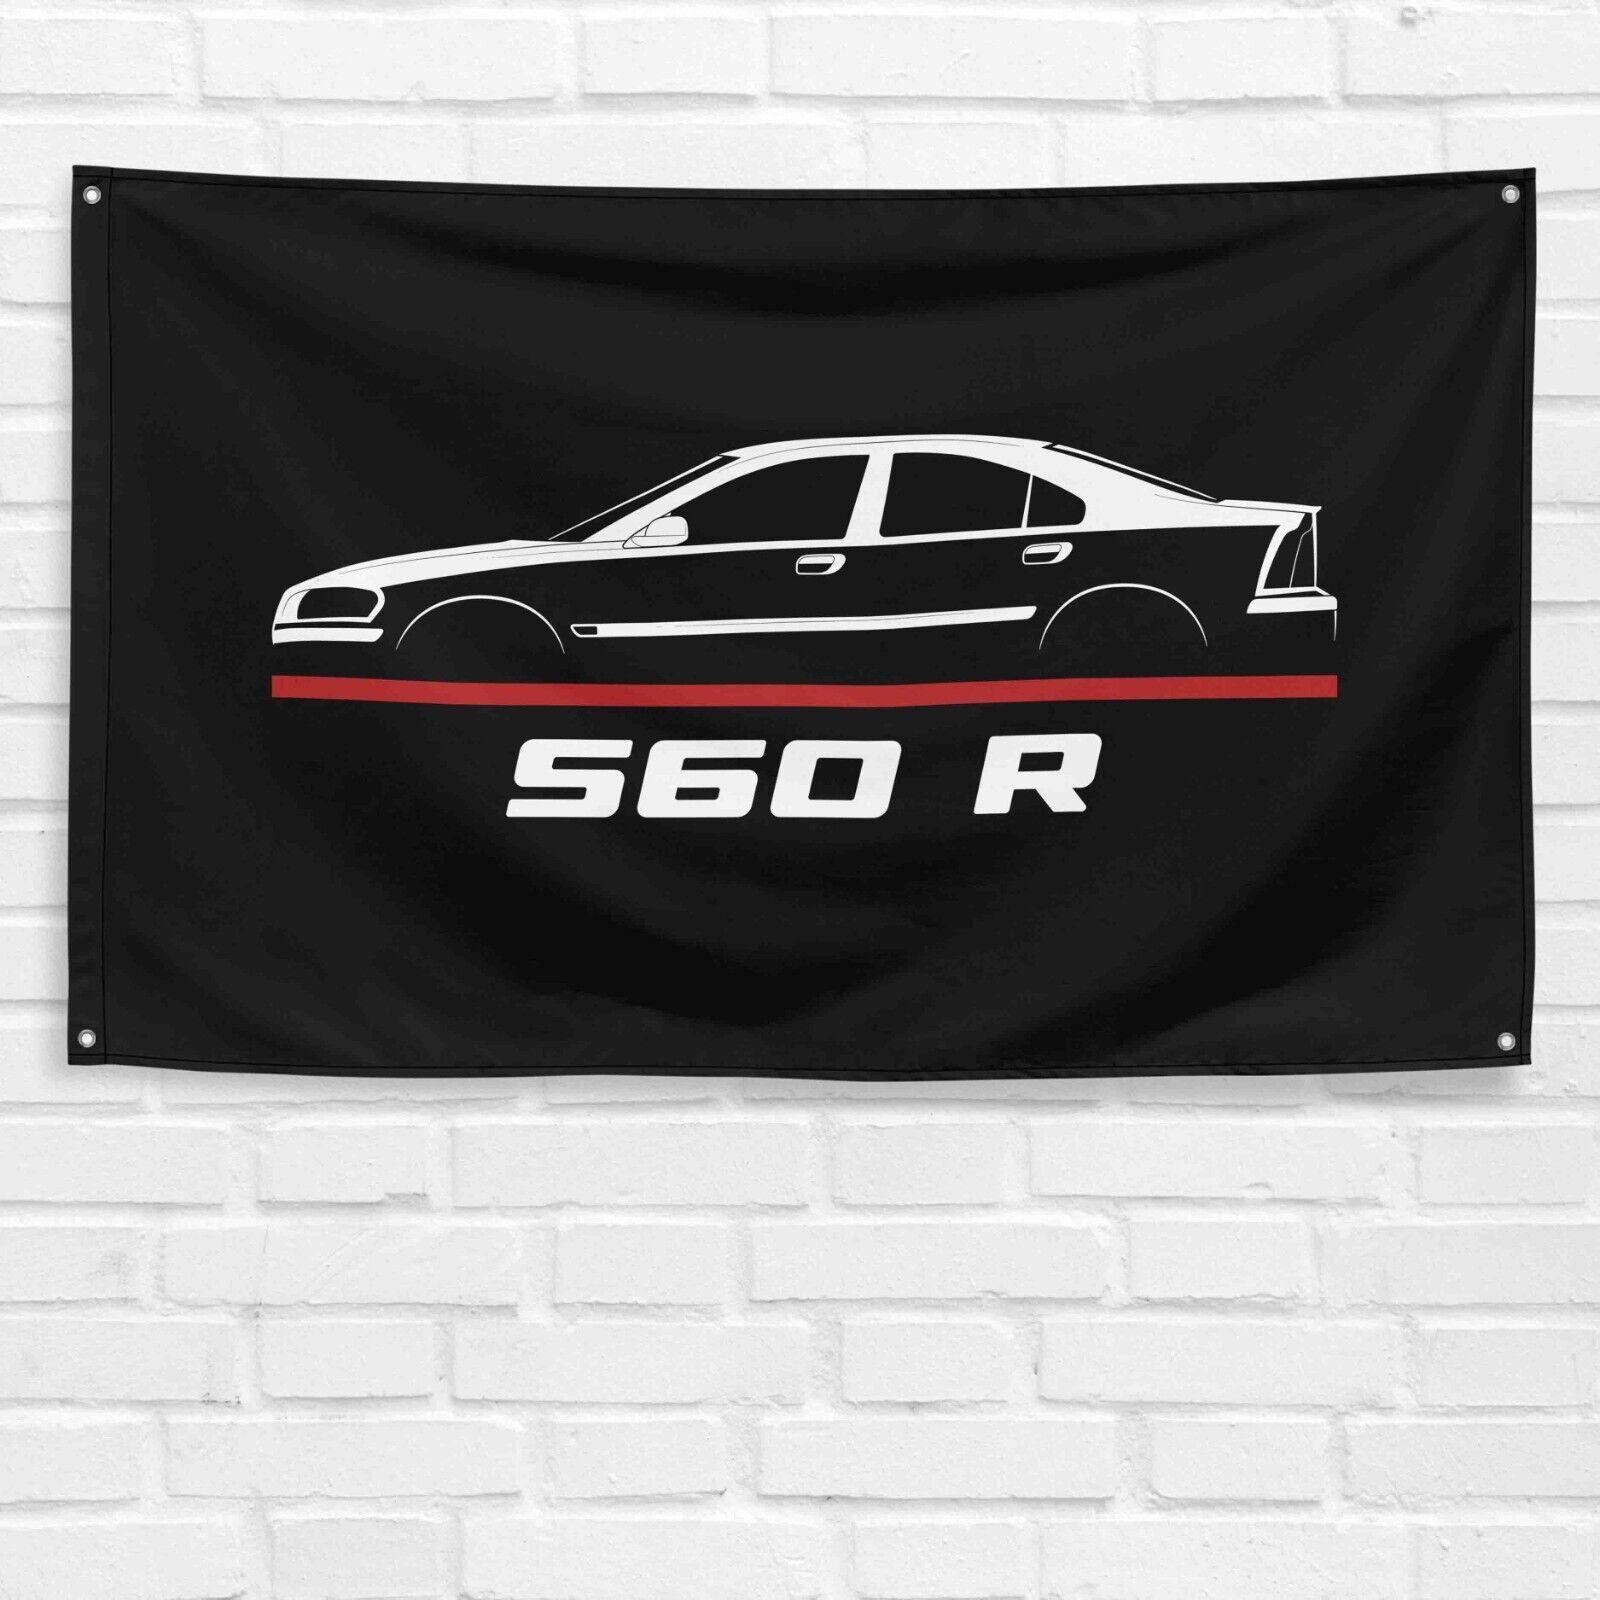 For Volvo S60 R 2000-2007 Car Enthusiast 3x5 ft Flag Birthday Gift Banner